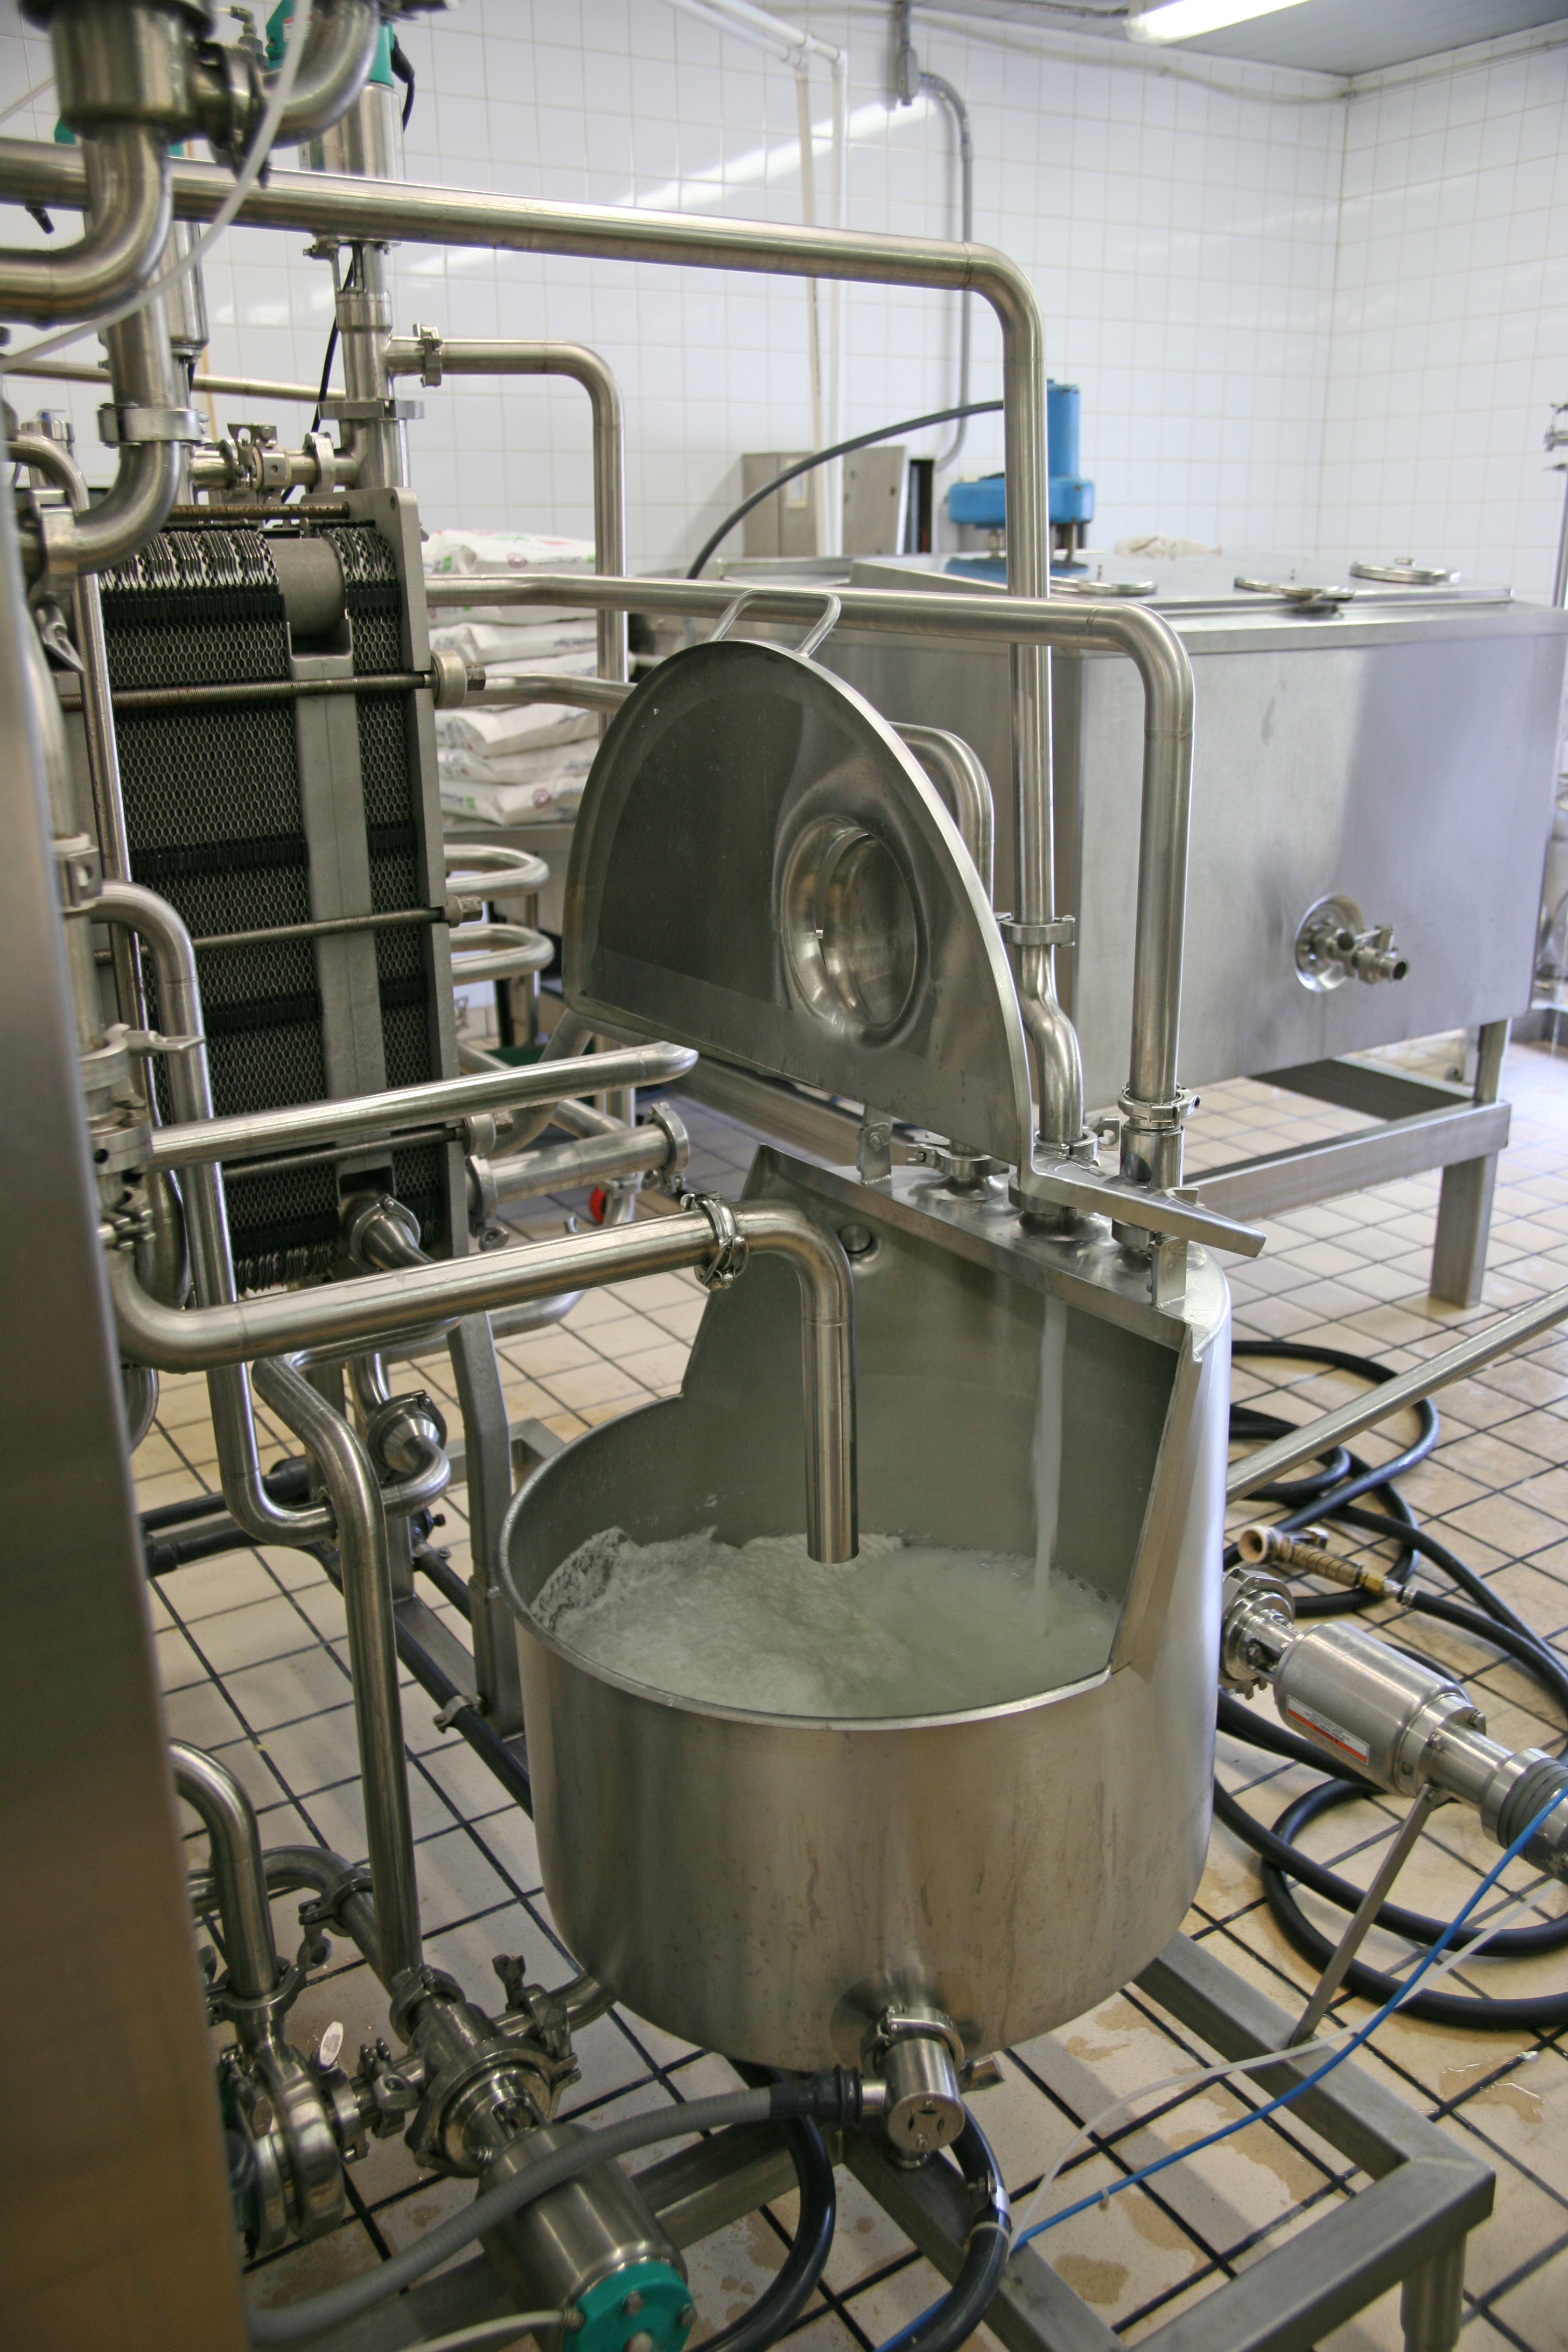 Here is raw milk going through the pasteurizer in the Hansen creamery. Our milk is pasteurized at 165 degrees for 15 seconds.